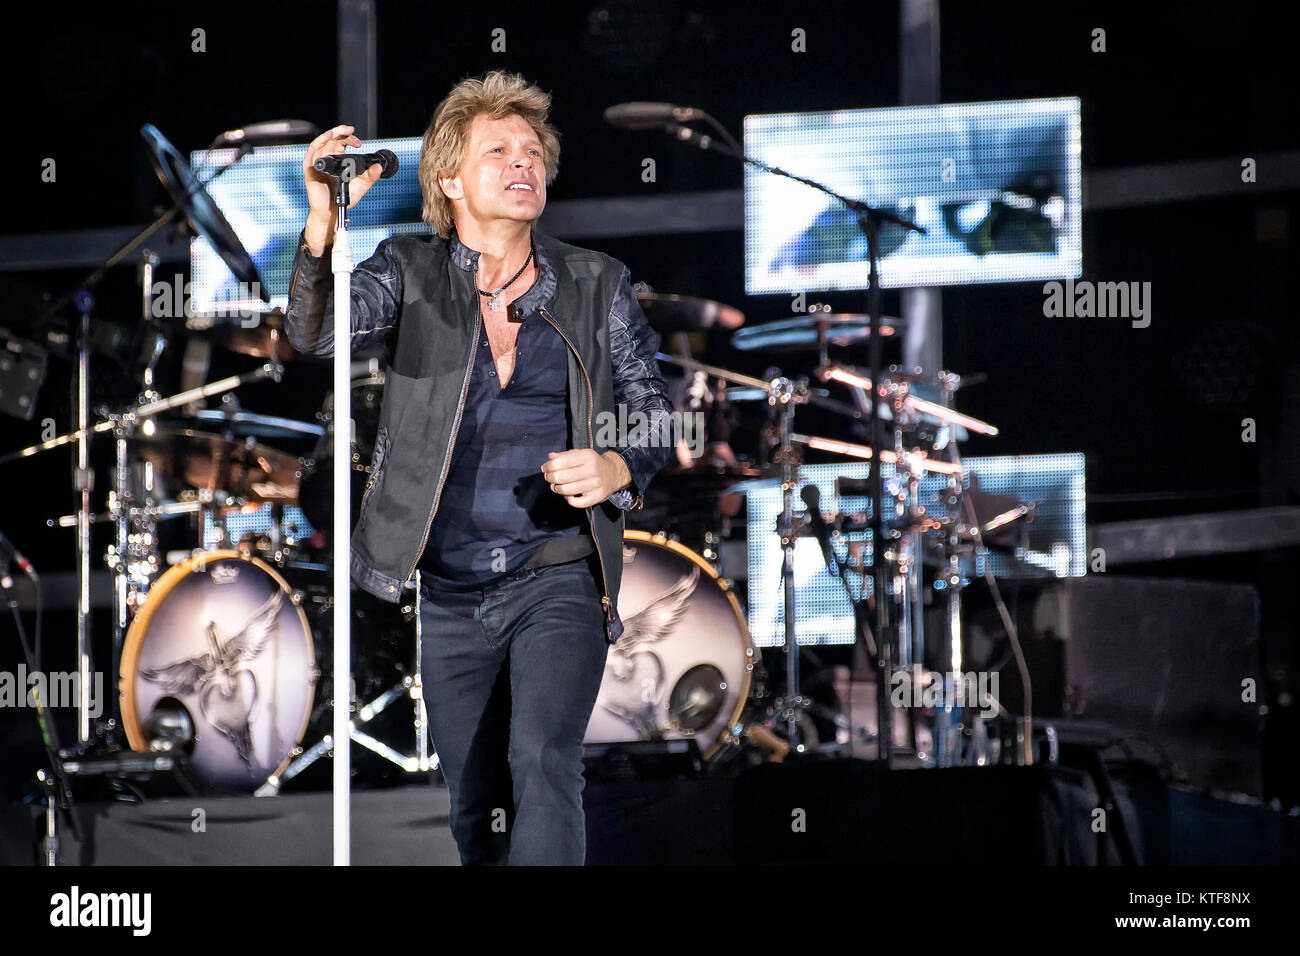 The American rock band Bon Jovi performs a live concert at Telenor Arena in Oslo. Here lead singer and musician Jon Bon Jovi is seen live on stage. Norway, 21/05 2013. Stock Photo